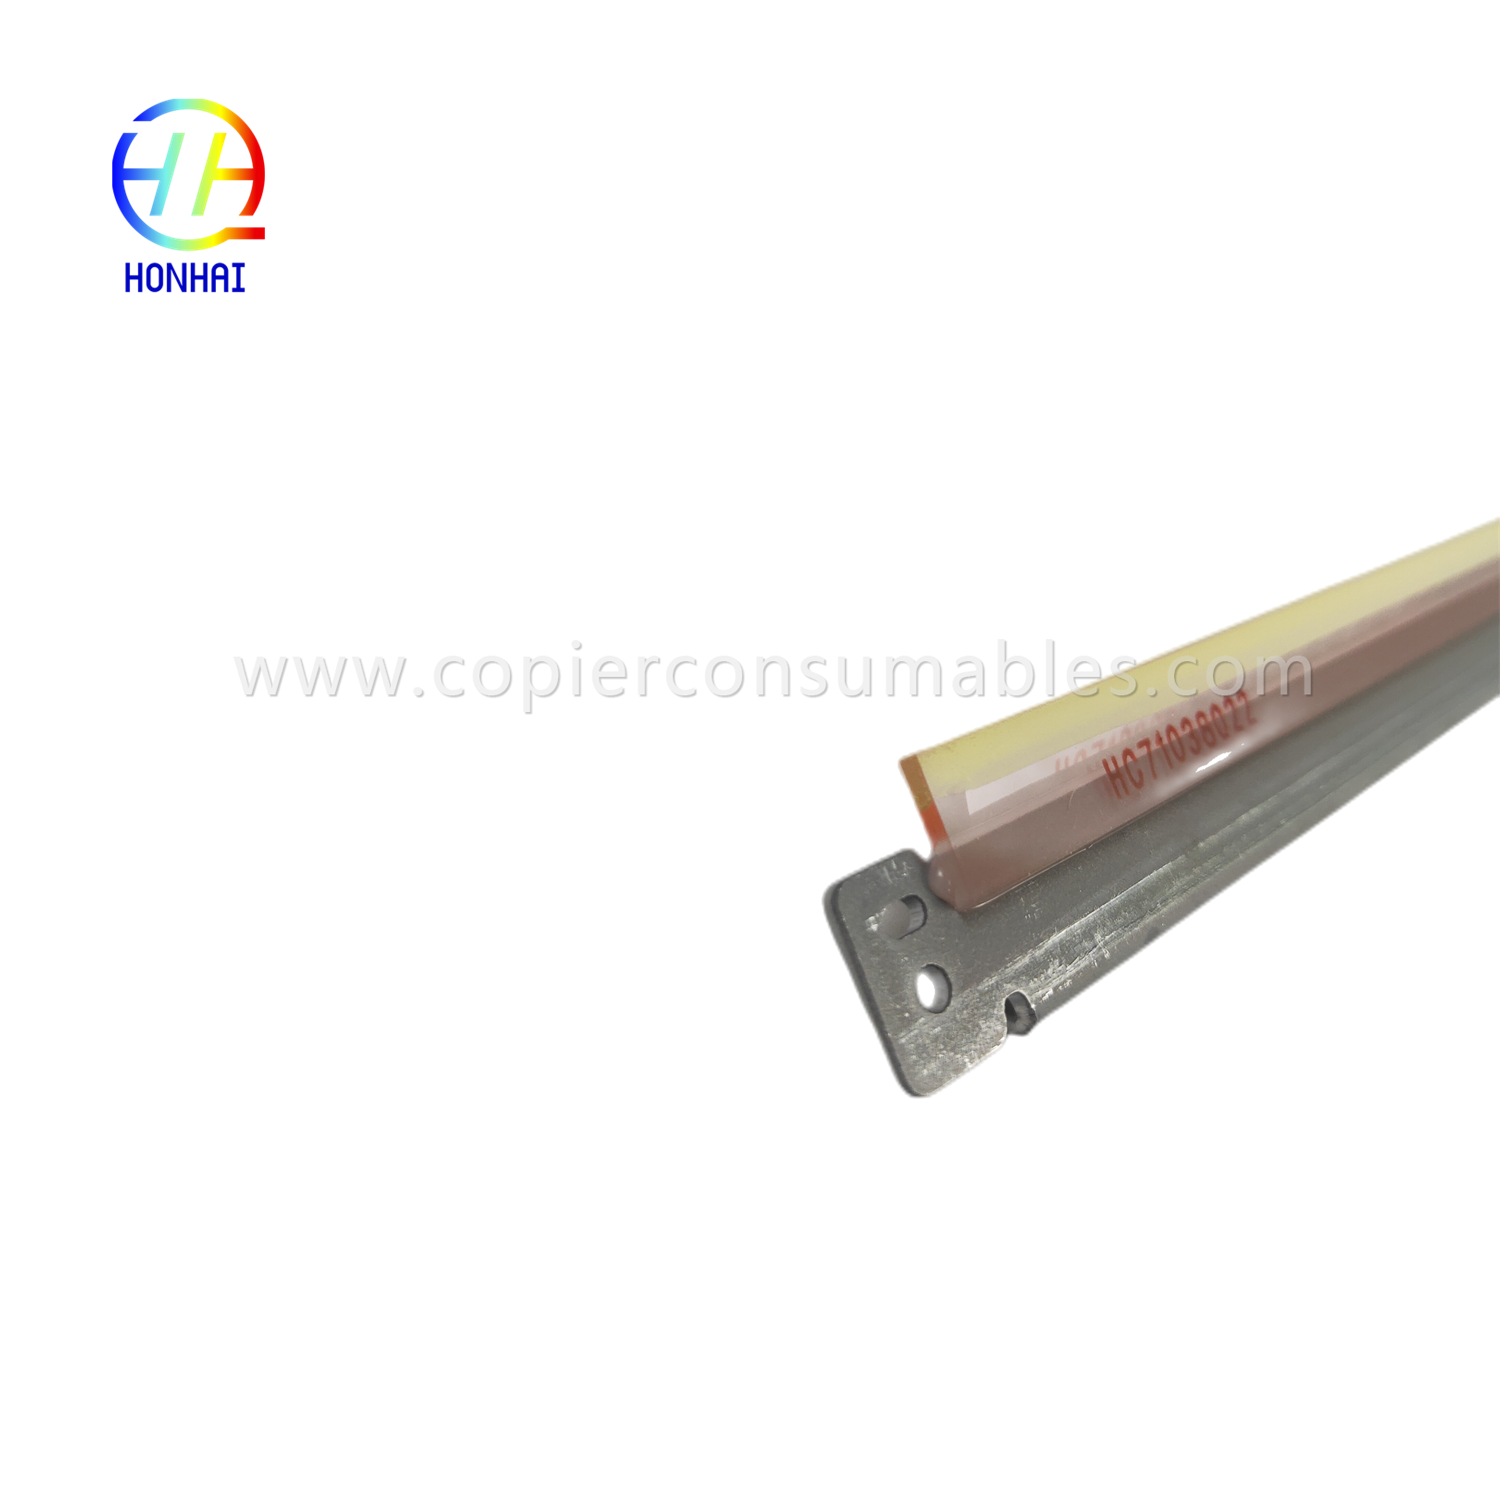 https://www.copierconsumables.com/original-drum-cleaning-blade-for-xerox-workcentre-7525-7530-7535-7545-7556-7830-7835-7845-7855-ምርት/